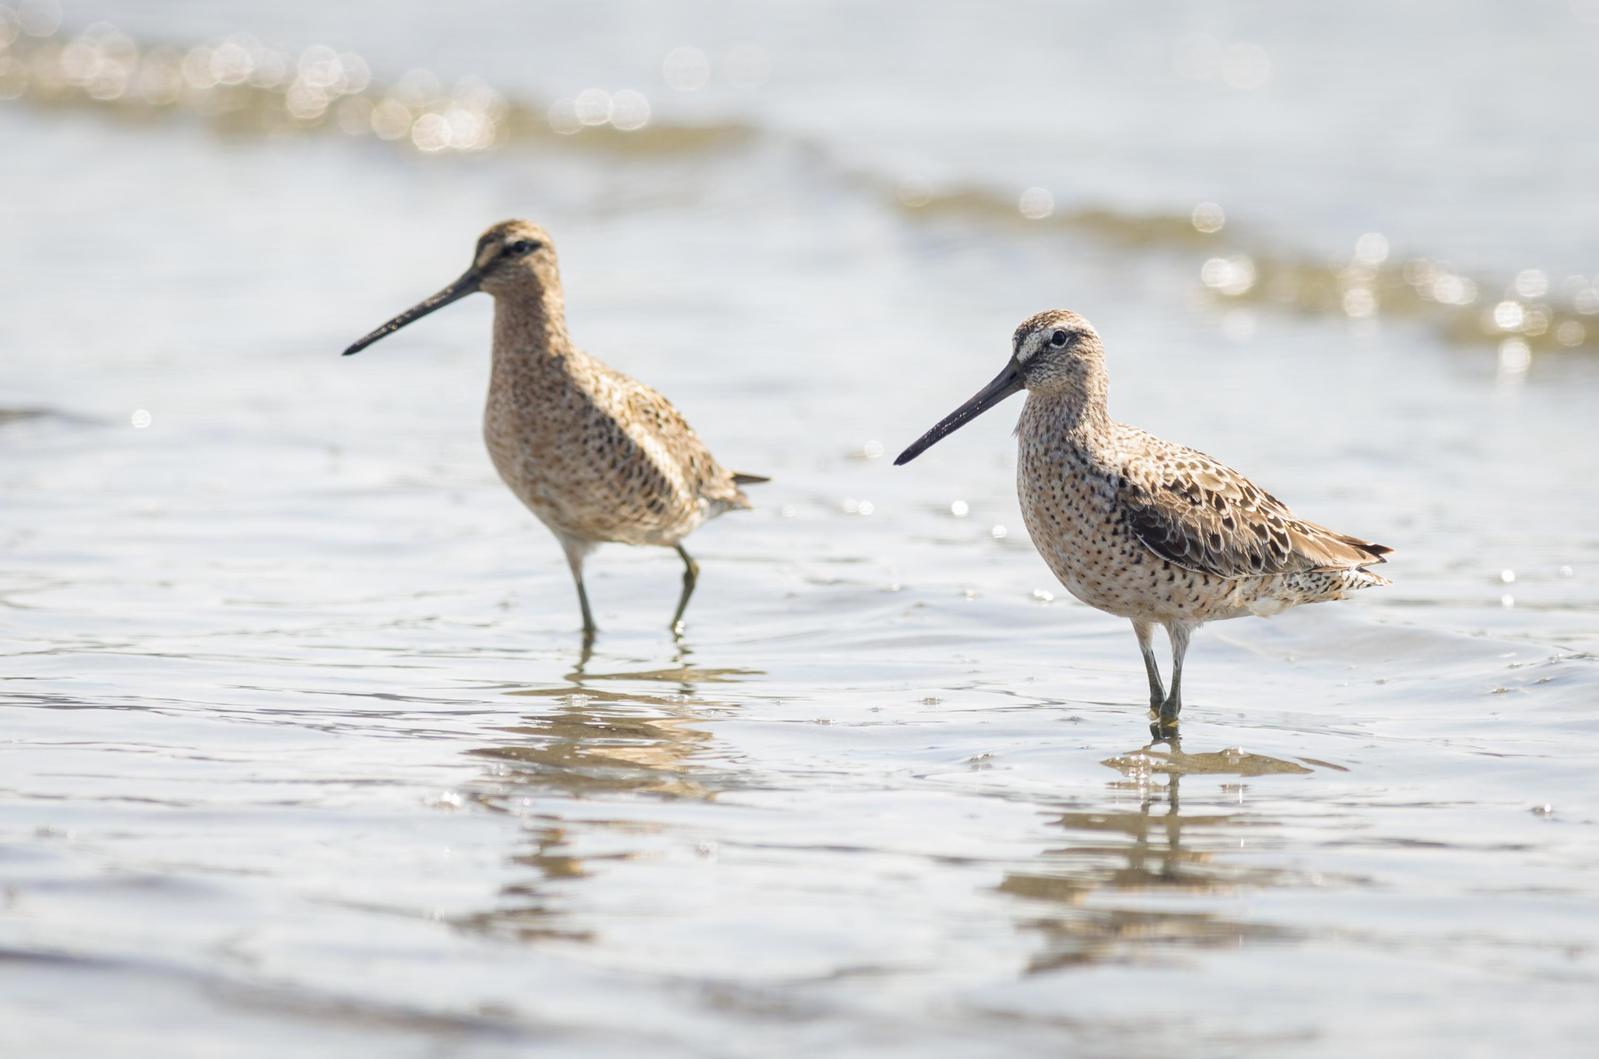 Short-billed Dowitcher Photo by Jesse Hodges